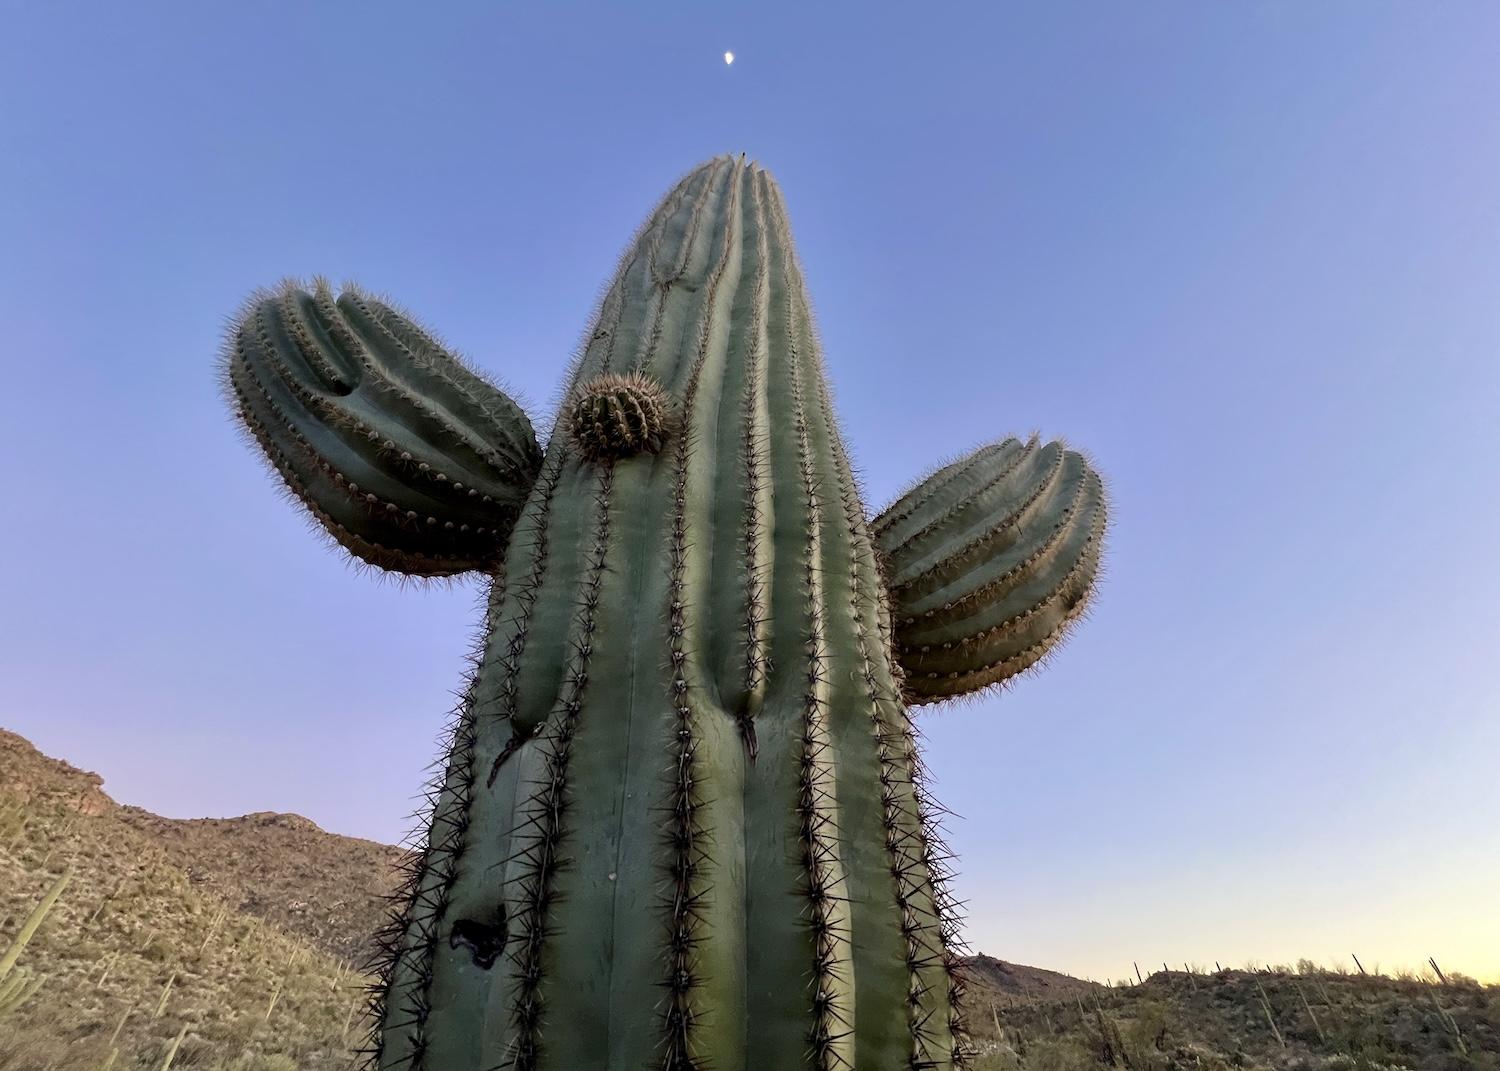 Minutes after sunset, the moon shines in the sky above a saguaro in Saguaro National Park.